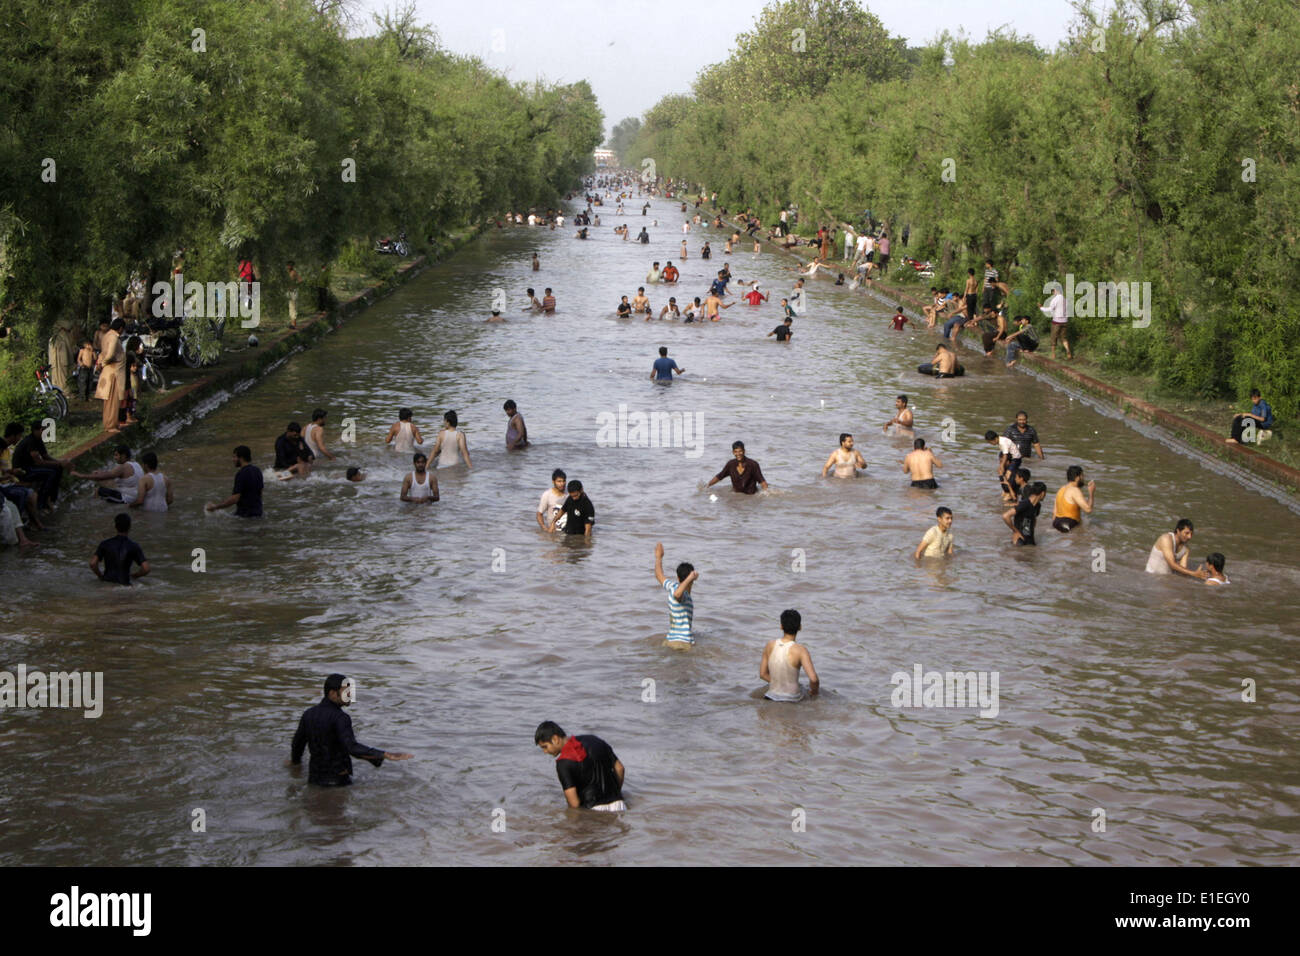 Lahore. 2nd June, 2014. People swim in a canal to beat the heat as temperature rises over 40 degrees Celsius in eastern Pakistan's Lahore on June 2, 2014. © Jamil Ahmed/Xinhua/Alamy Live News Stock Photo